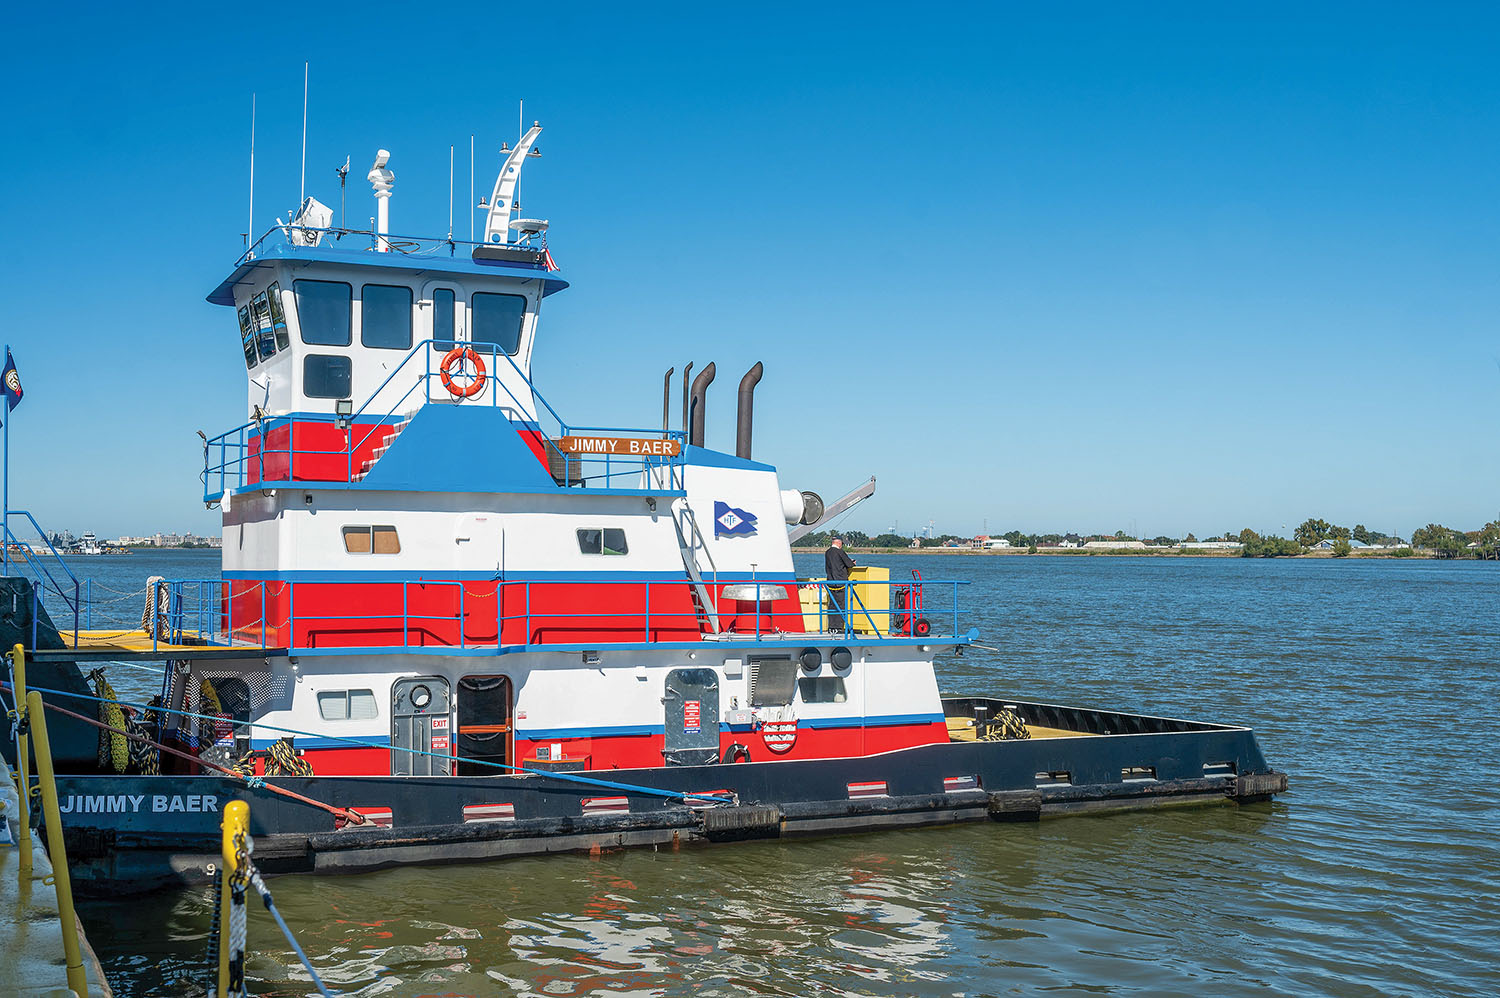 The mv. Jimmy Baer, formerly the Brayden Ray, underwent a refurbishment at FMT Shipyard. (Photo by Katie Sikora, courtesy of Harbor Towing & Fleeting)